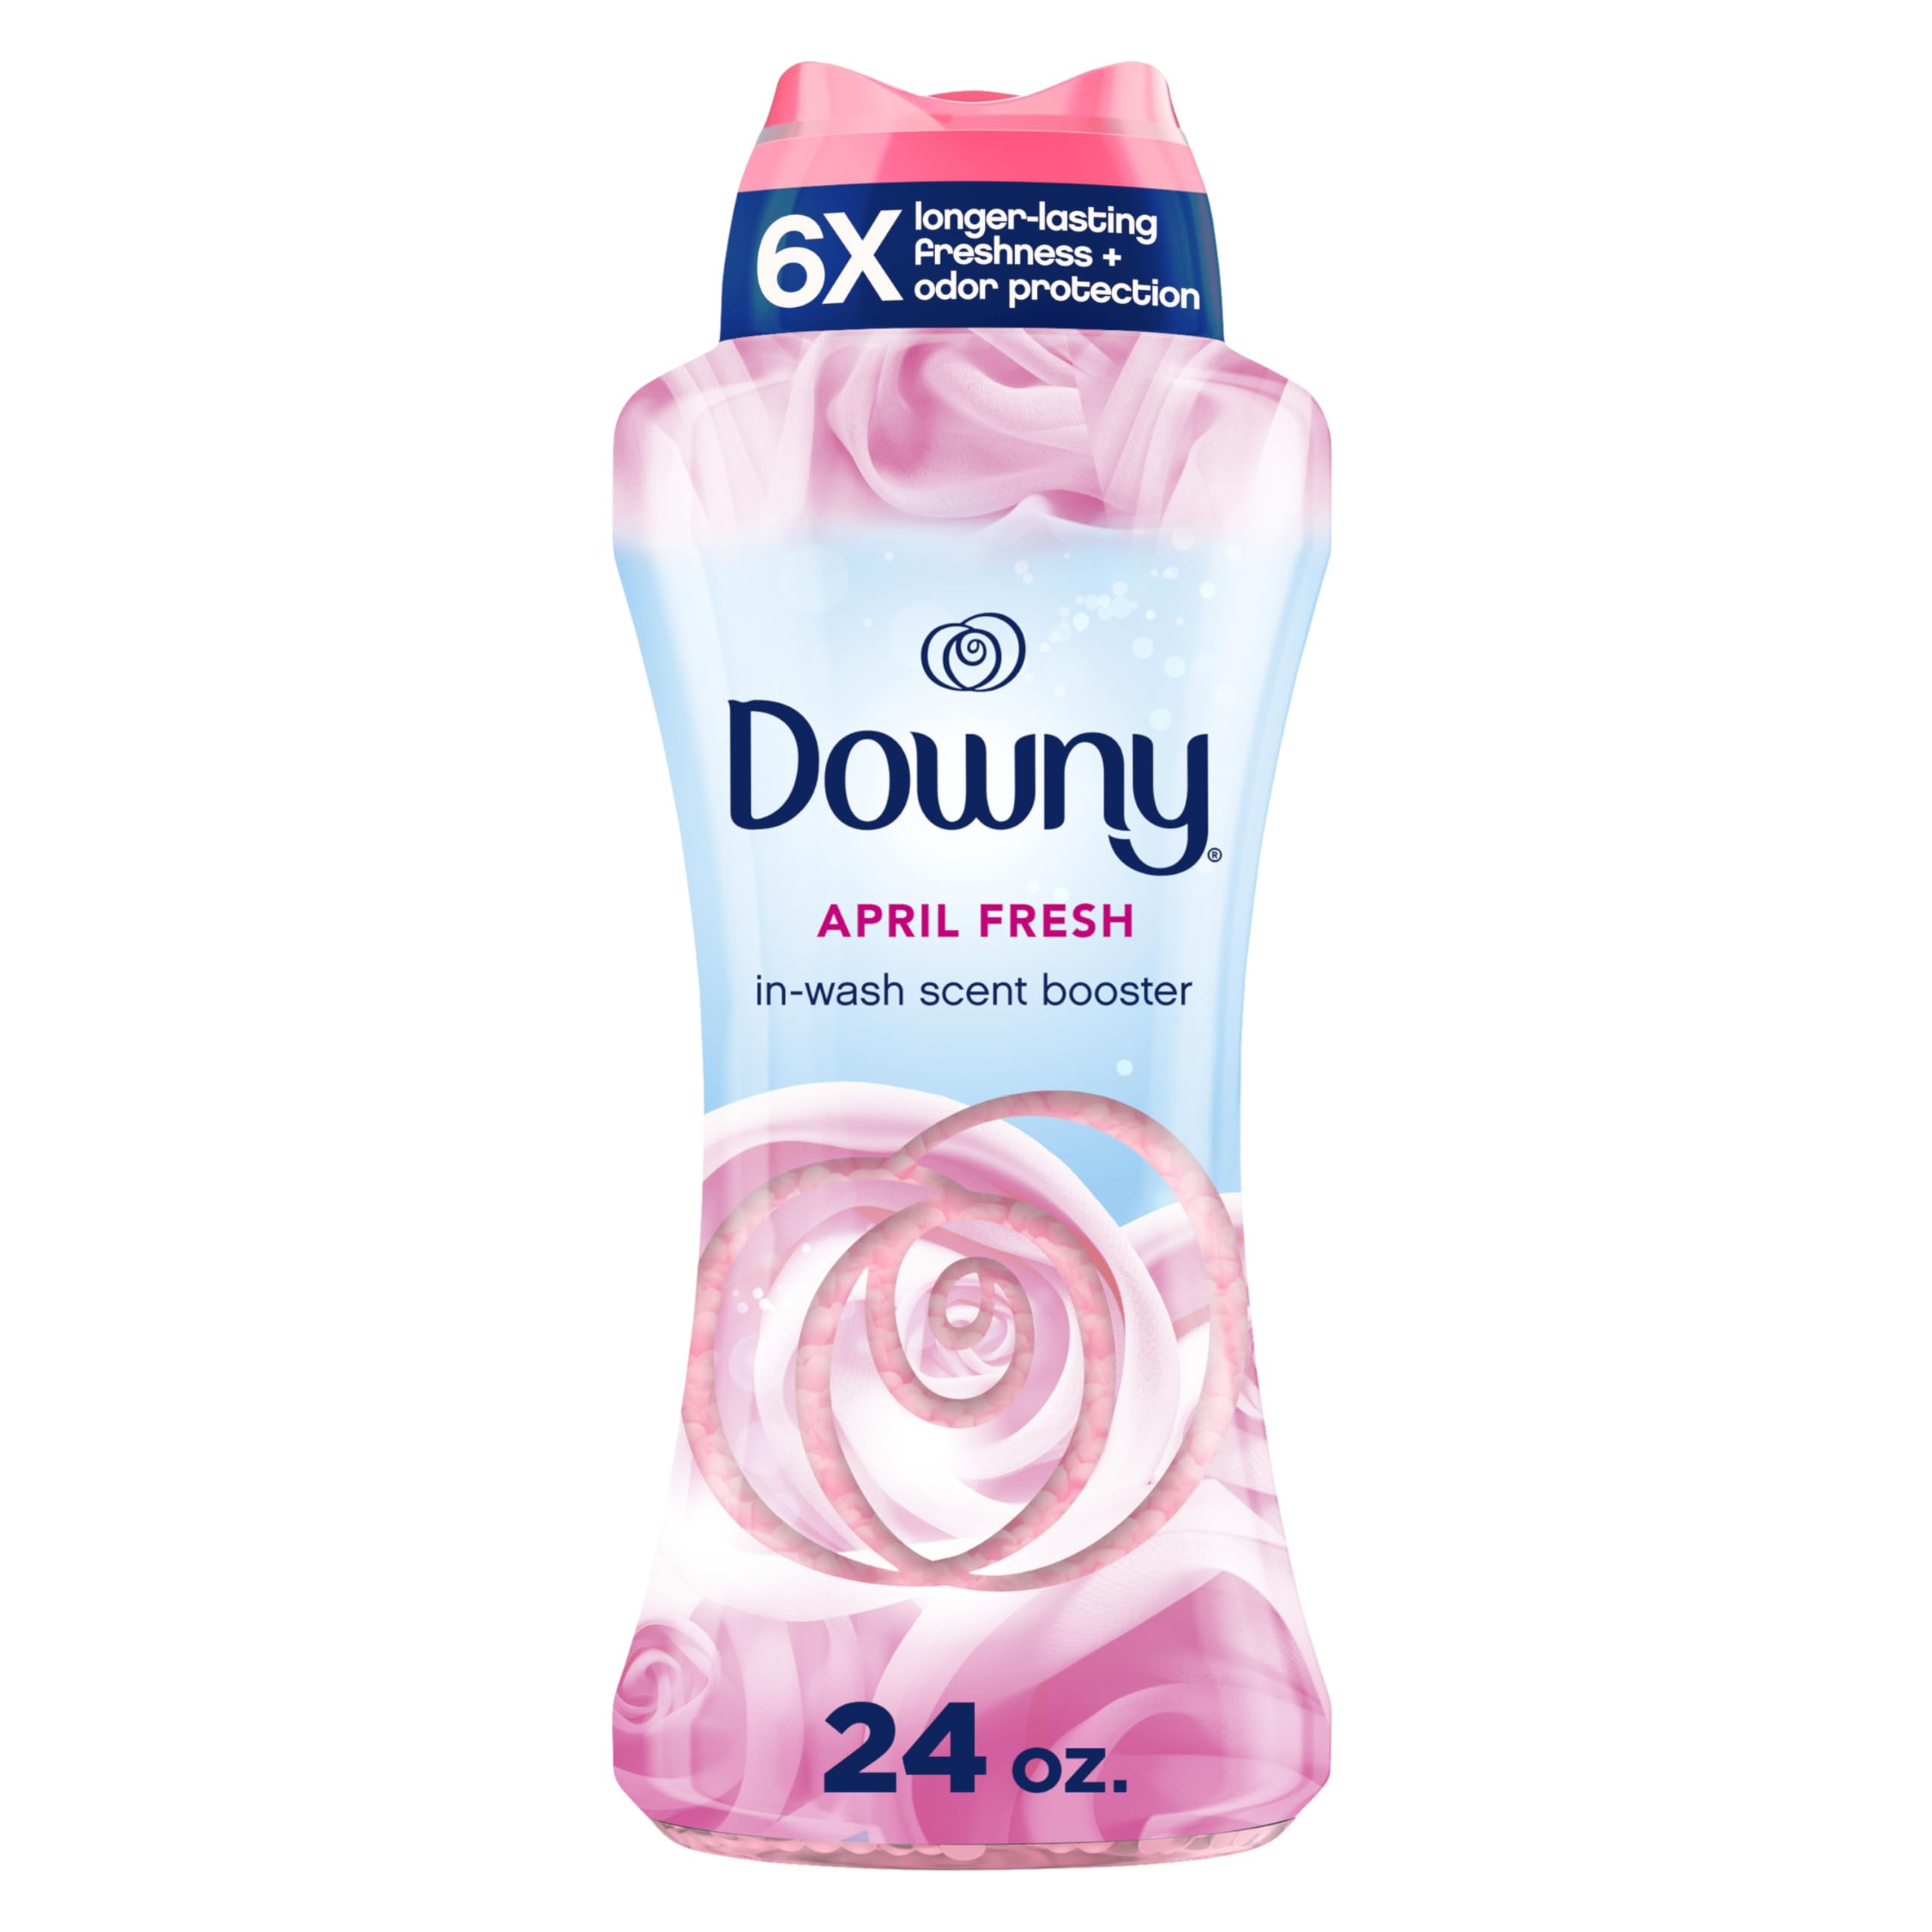 24-Oz Downy In-Wash Laundry Scent Booster Beads (April Fresh) + $10 Amazon Credit $12.75 w/ S&S + Free Shipping w/ Prime or on $35+